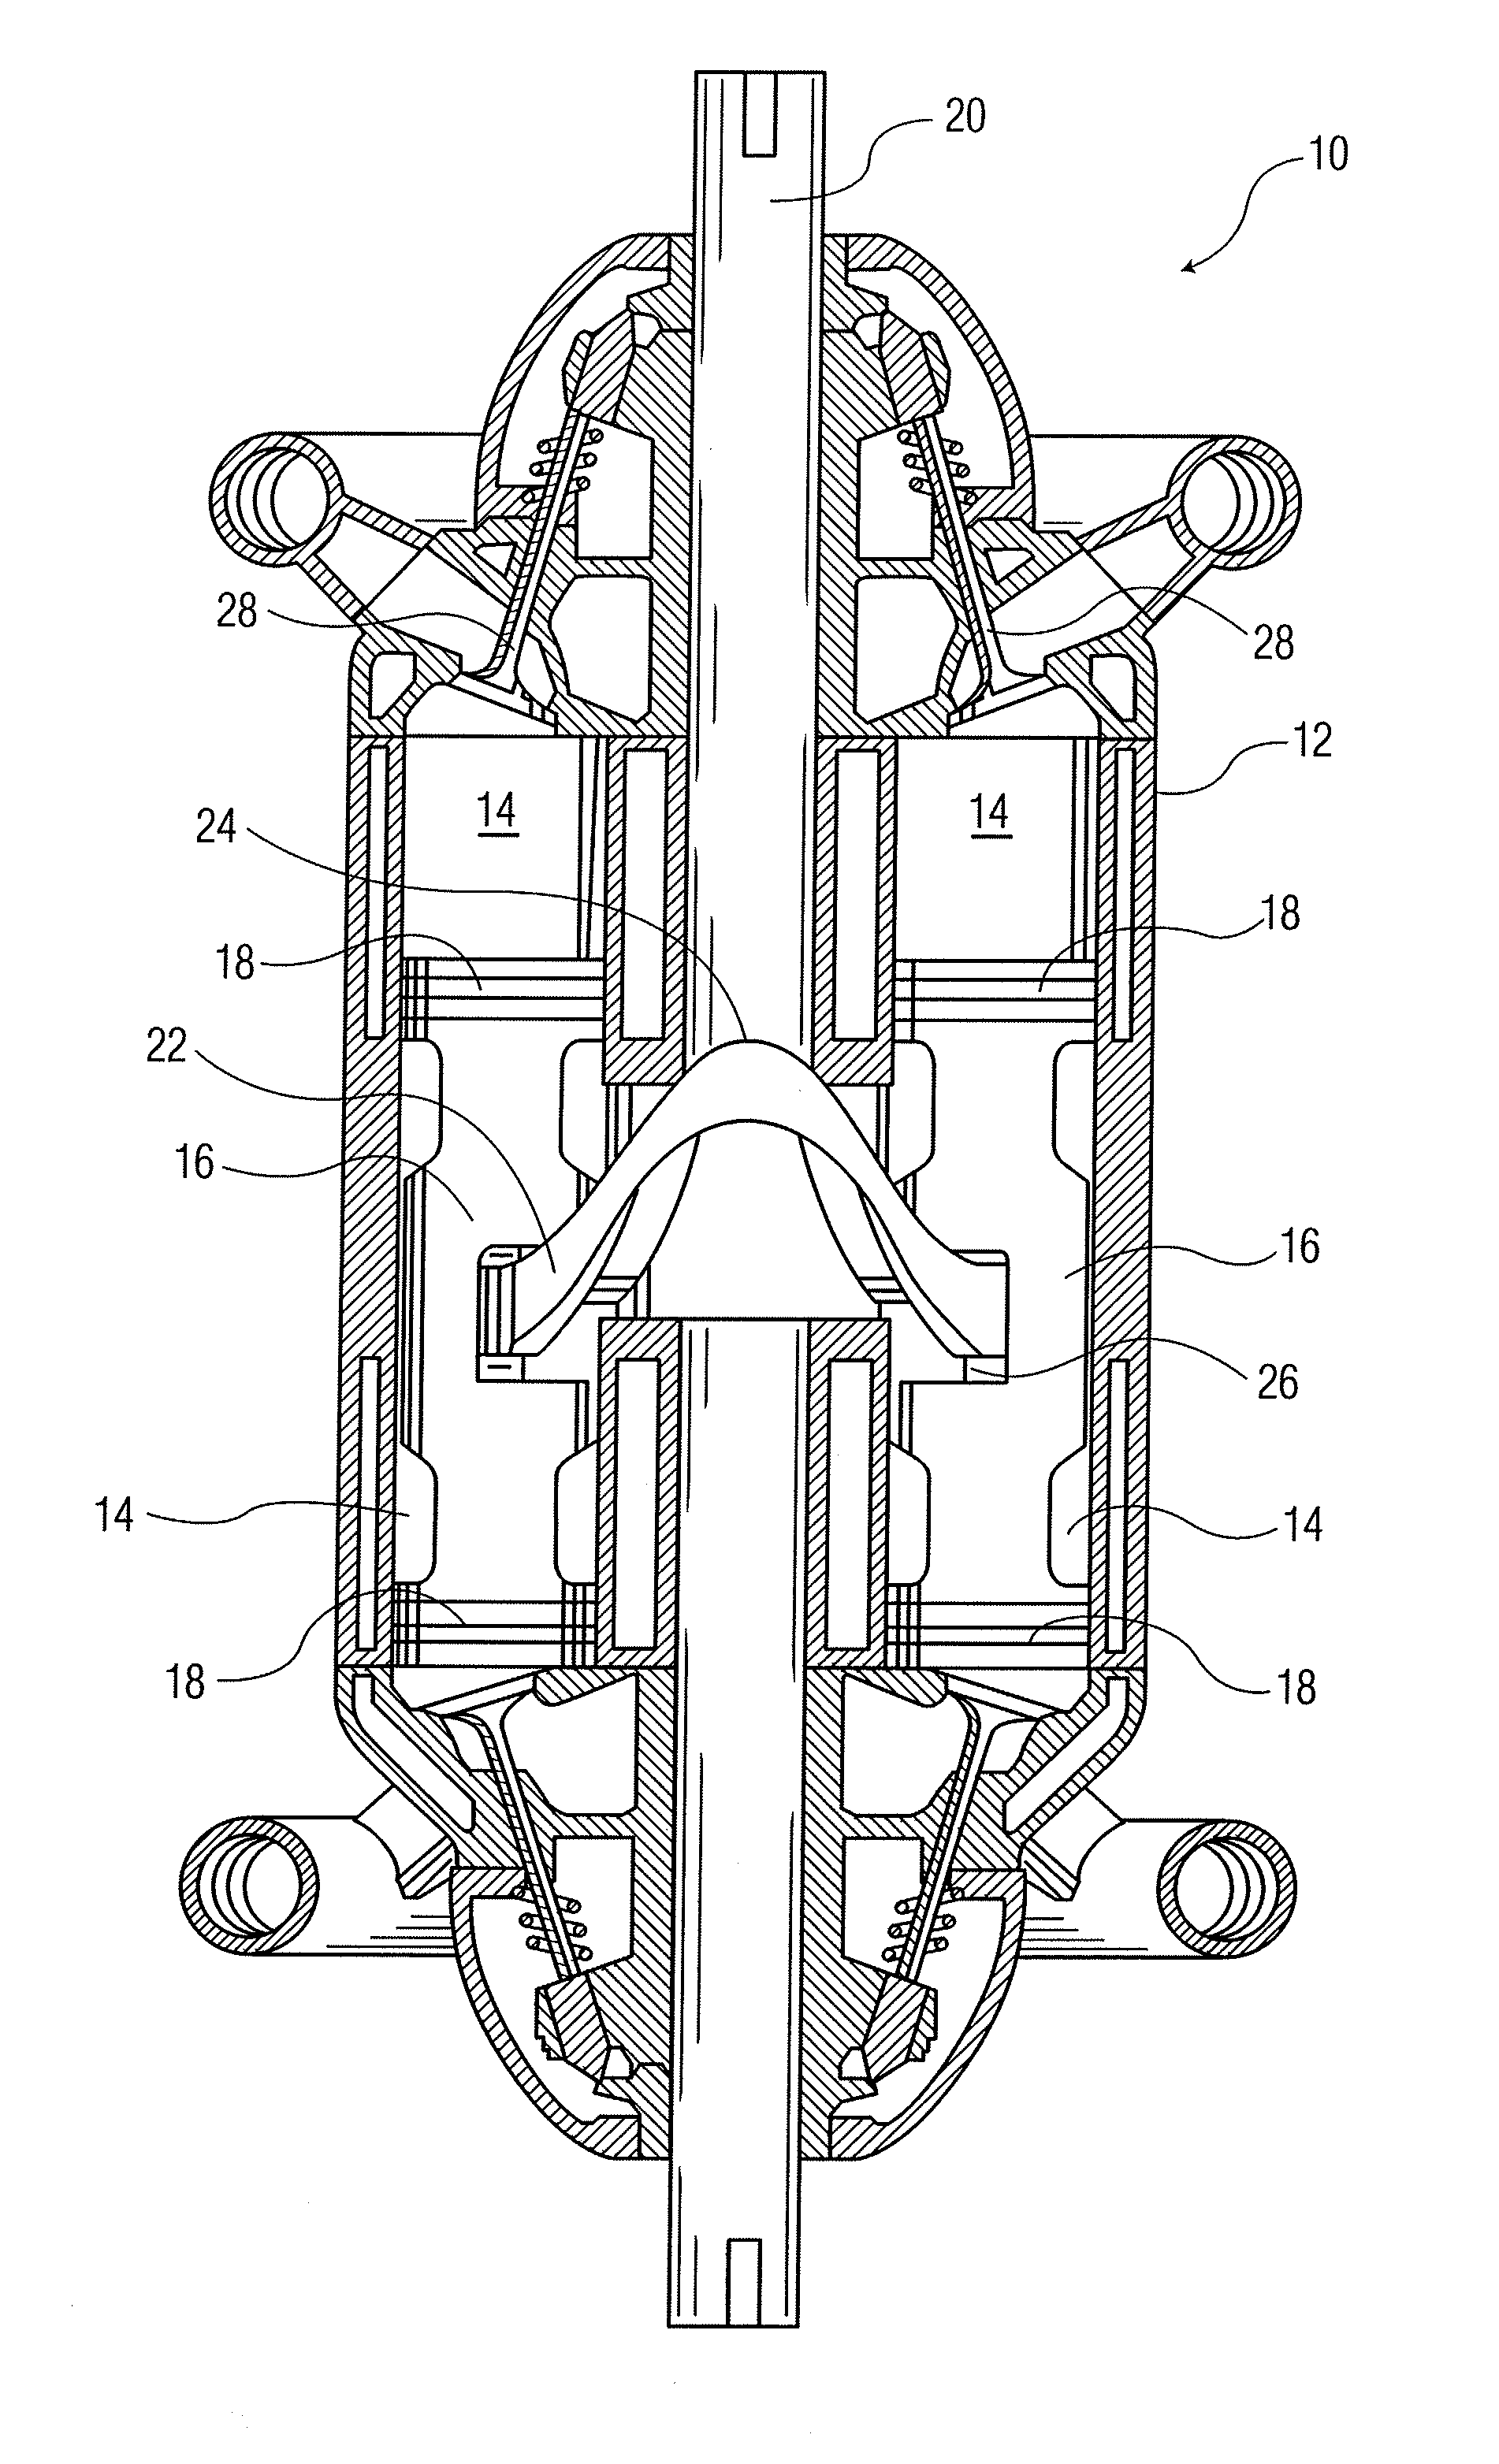 Barrel-type internal combustion engine and/or piston actuated compressor with optimal piston motion for increased efficiency